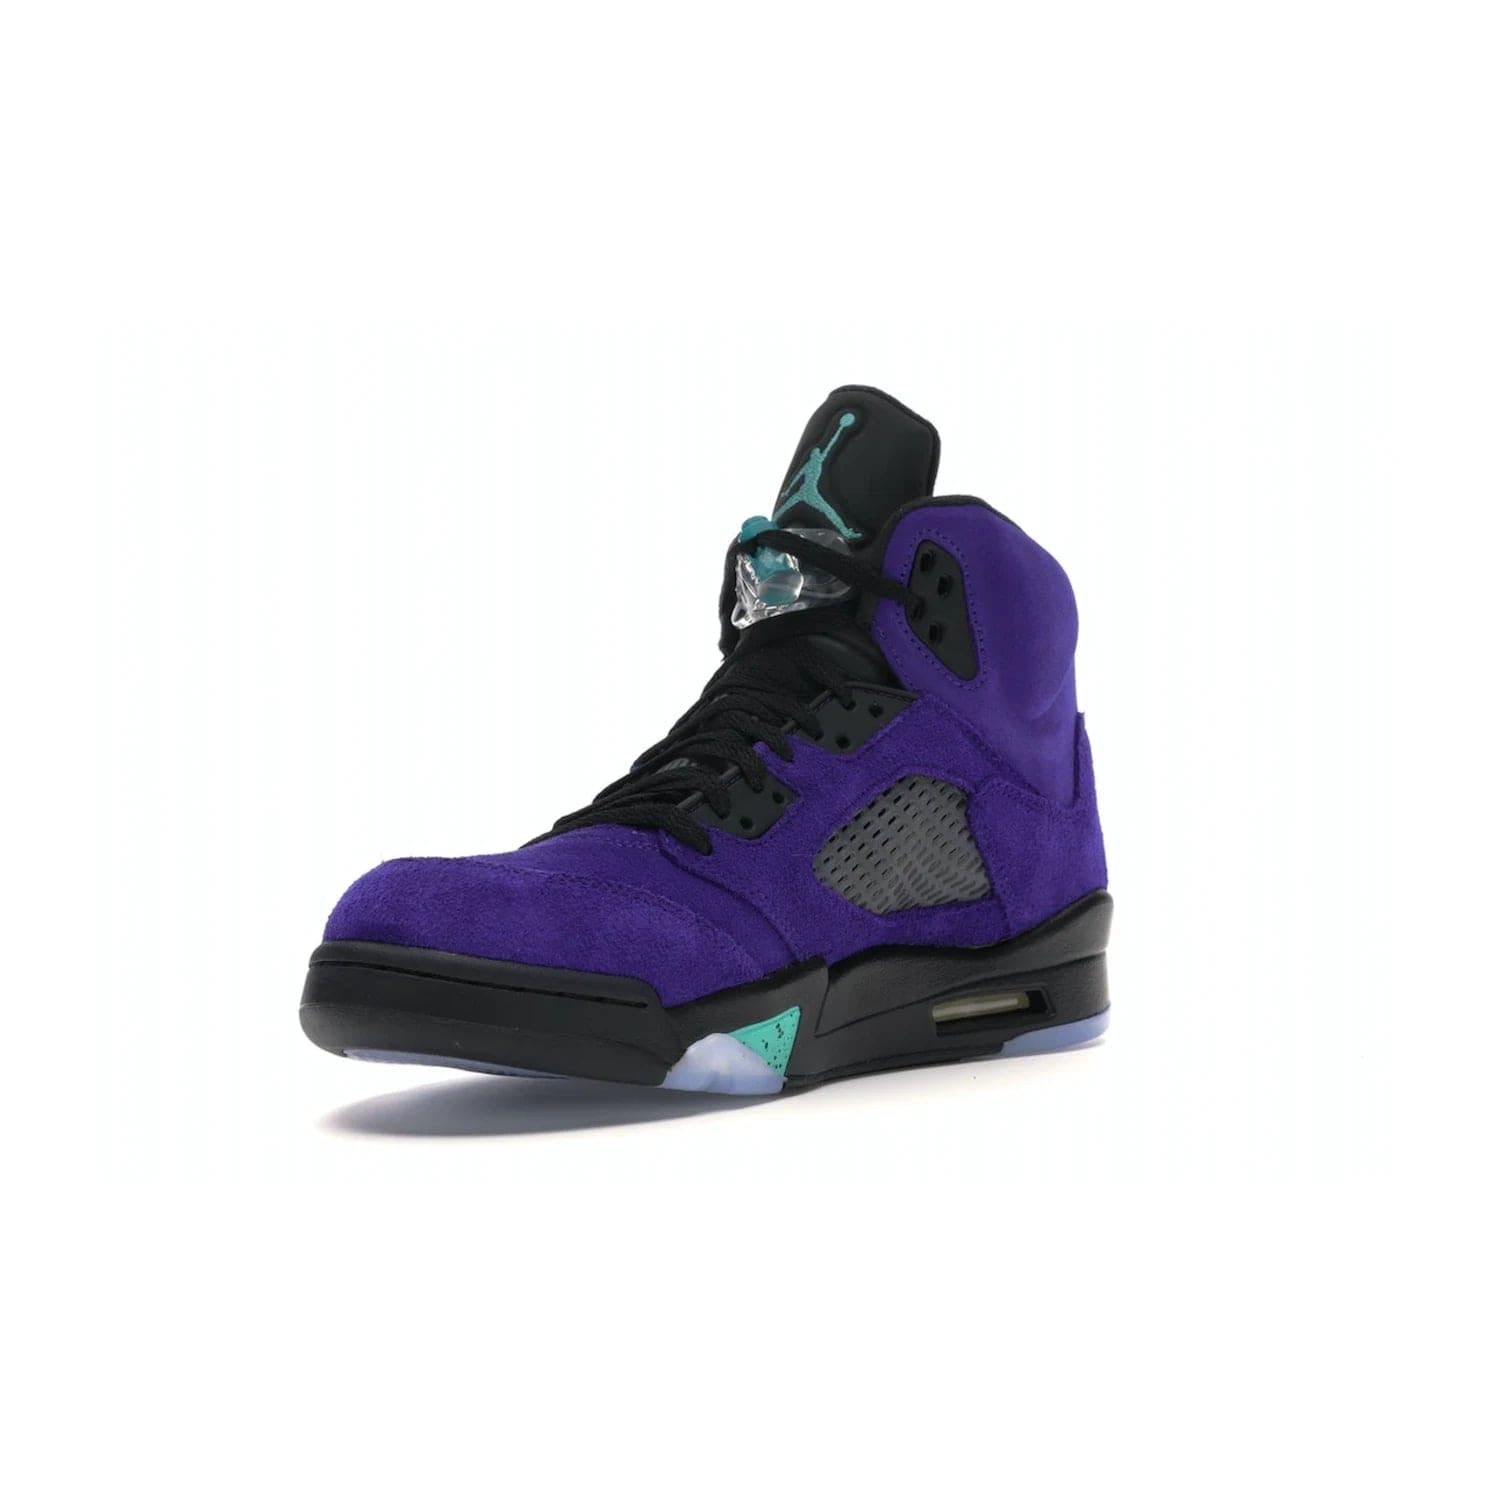 Jordan 5 Retro Alternate Grape - Image 14 - Only at www.BallersClubKickz.com - Bring the classic Jordan 5 Retro Alternate Grape to your sneaker collection! Featuring a purple suede upper, charcoal underlays, green detailing, and an icy and green outsole. Releasing for the first time since 1990, don't miss this chance to add a piece of sneaker history to your collection.